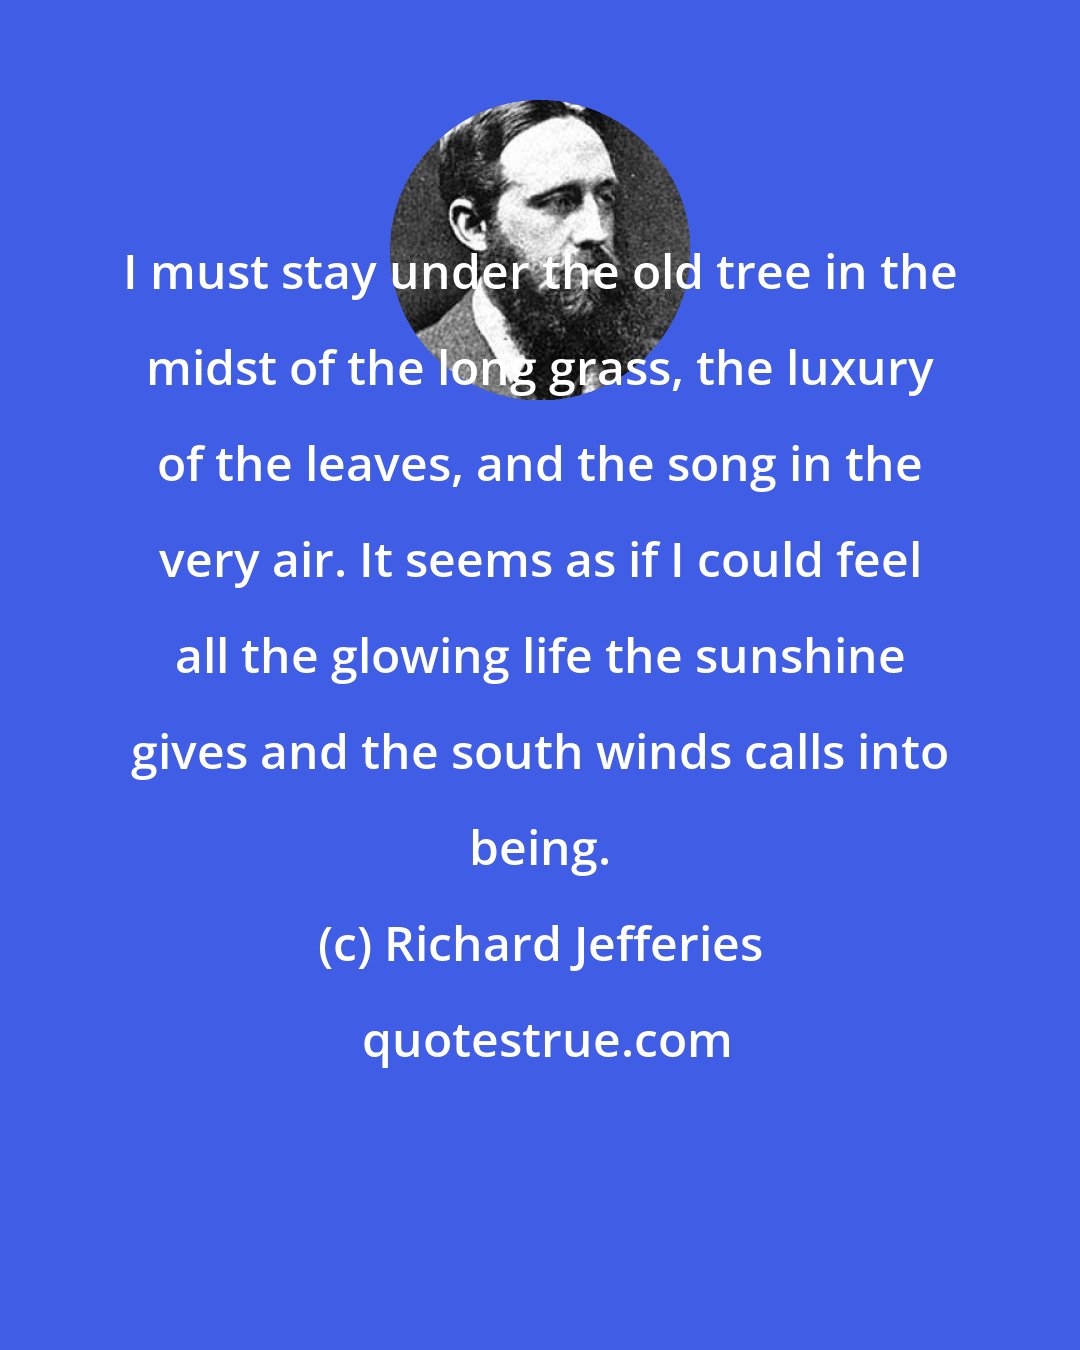 Richard Jefferies: I must stay under the old tree in the midst of the long grass, the luxury of the leaves, and the song in the very air. It seems as if I could feel all the glowing life the sunshine gives and the south winds calls into being.